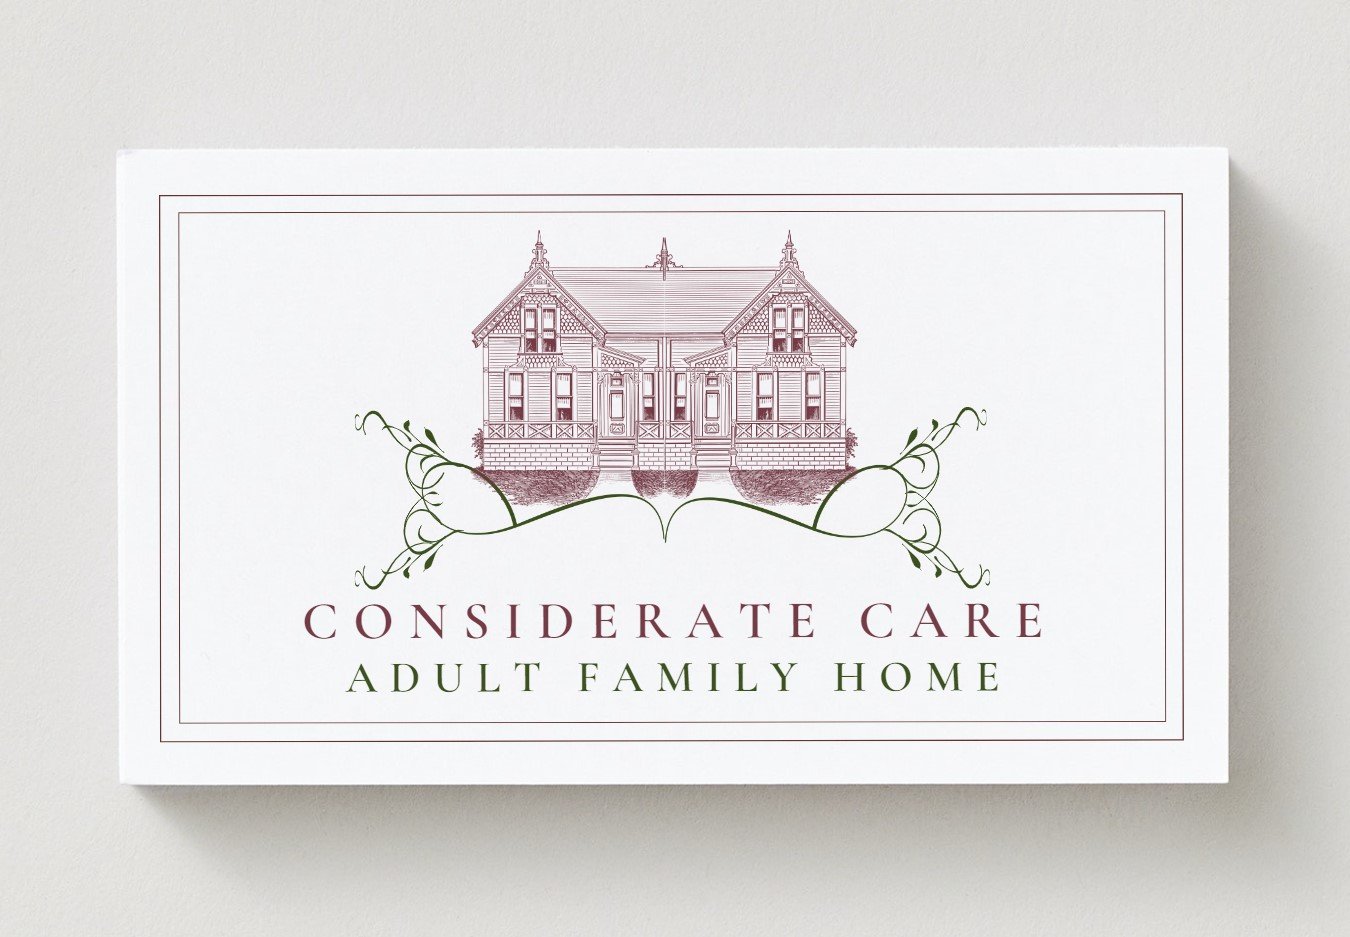 21051401 - Considerate Care AFH - Business Cards  - Front.jpg